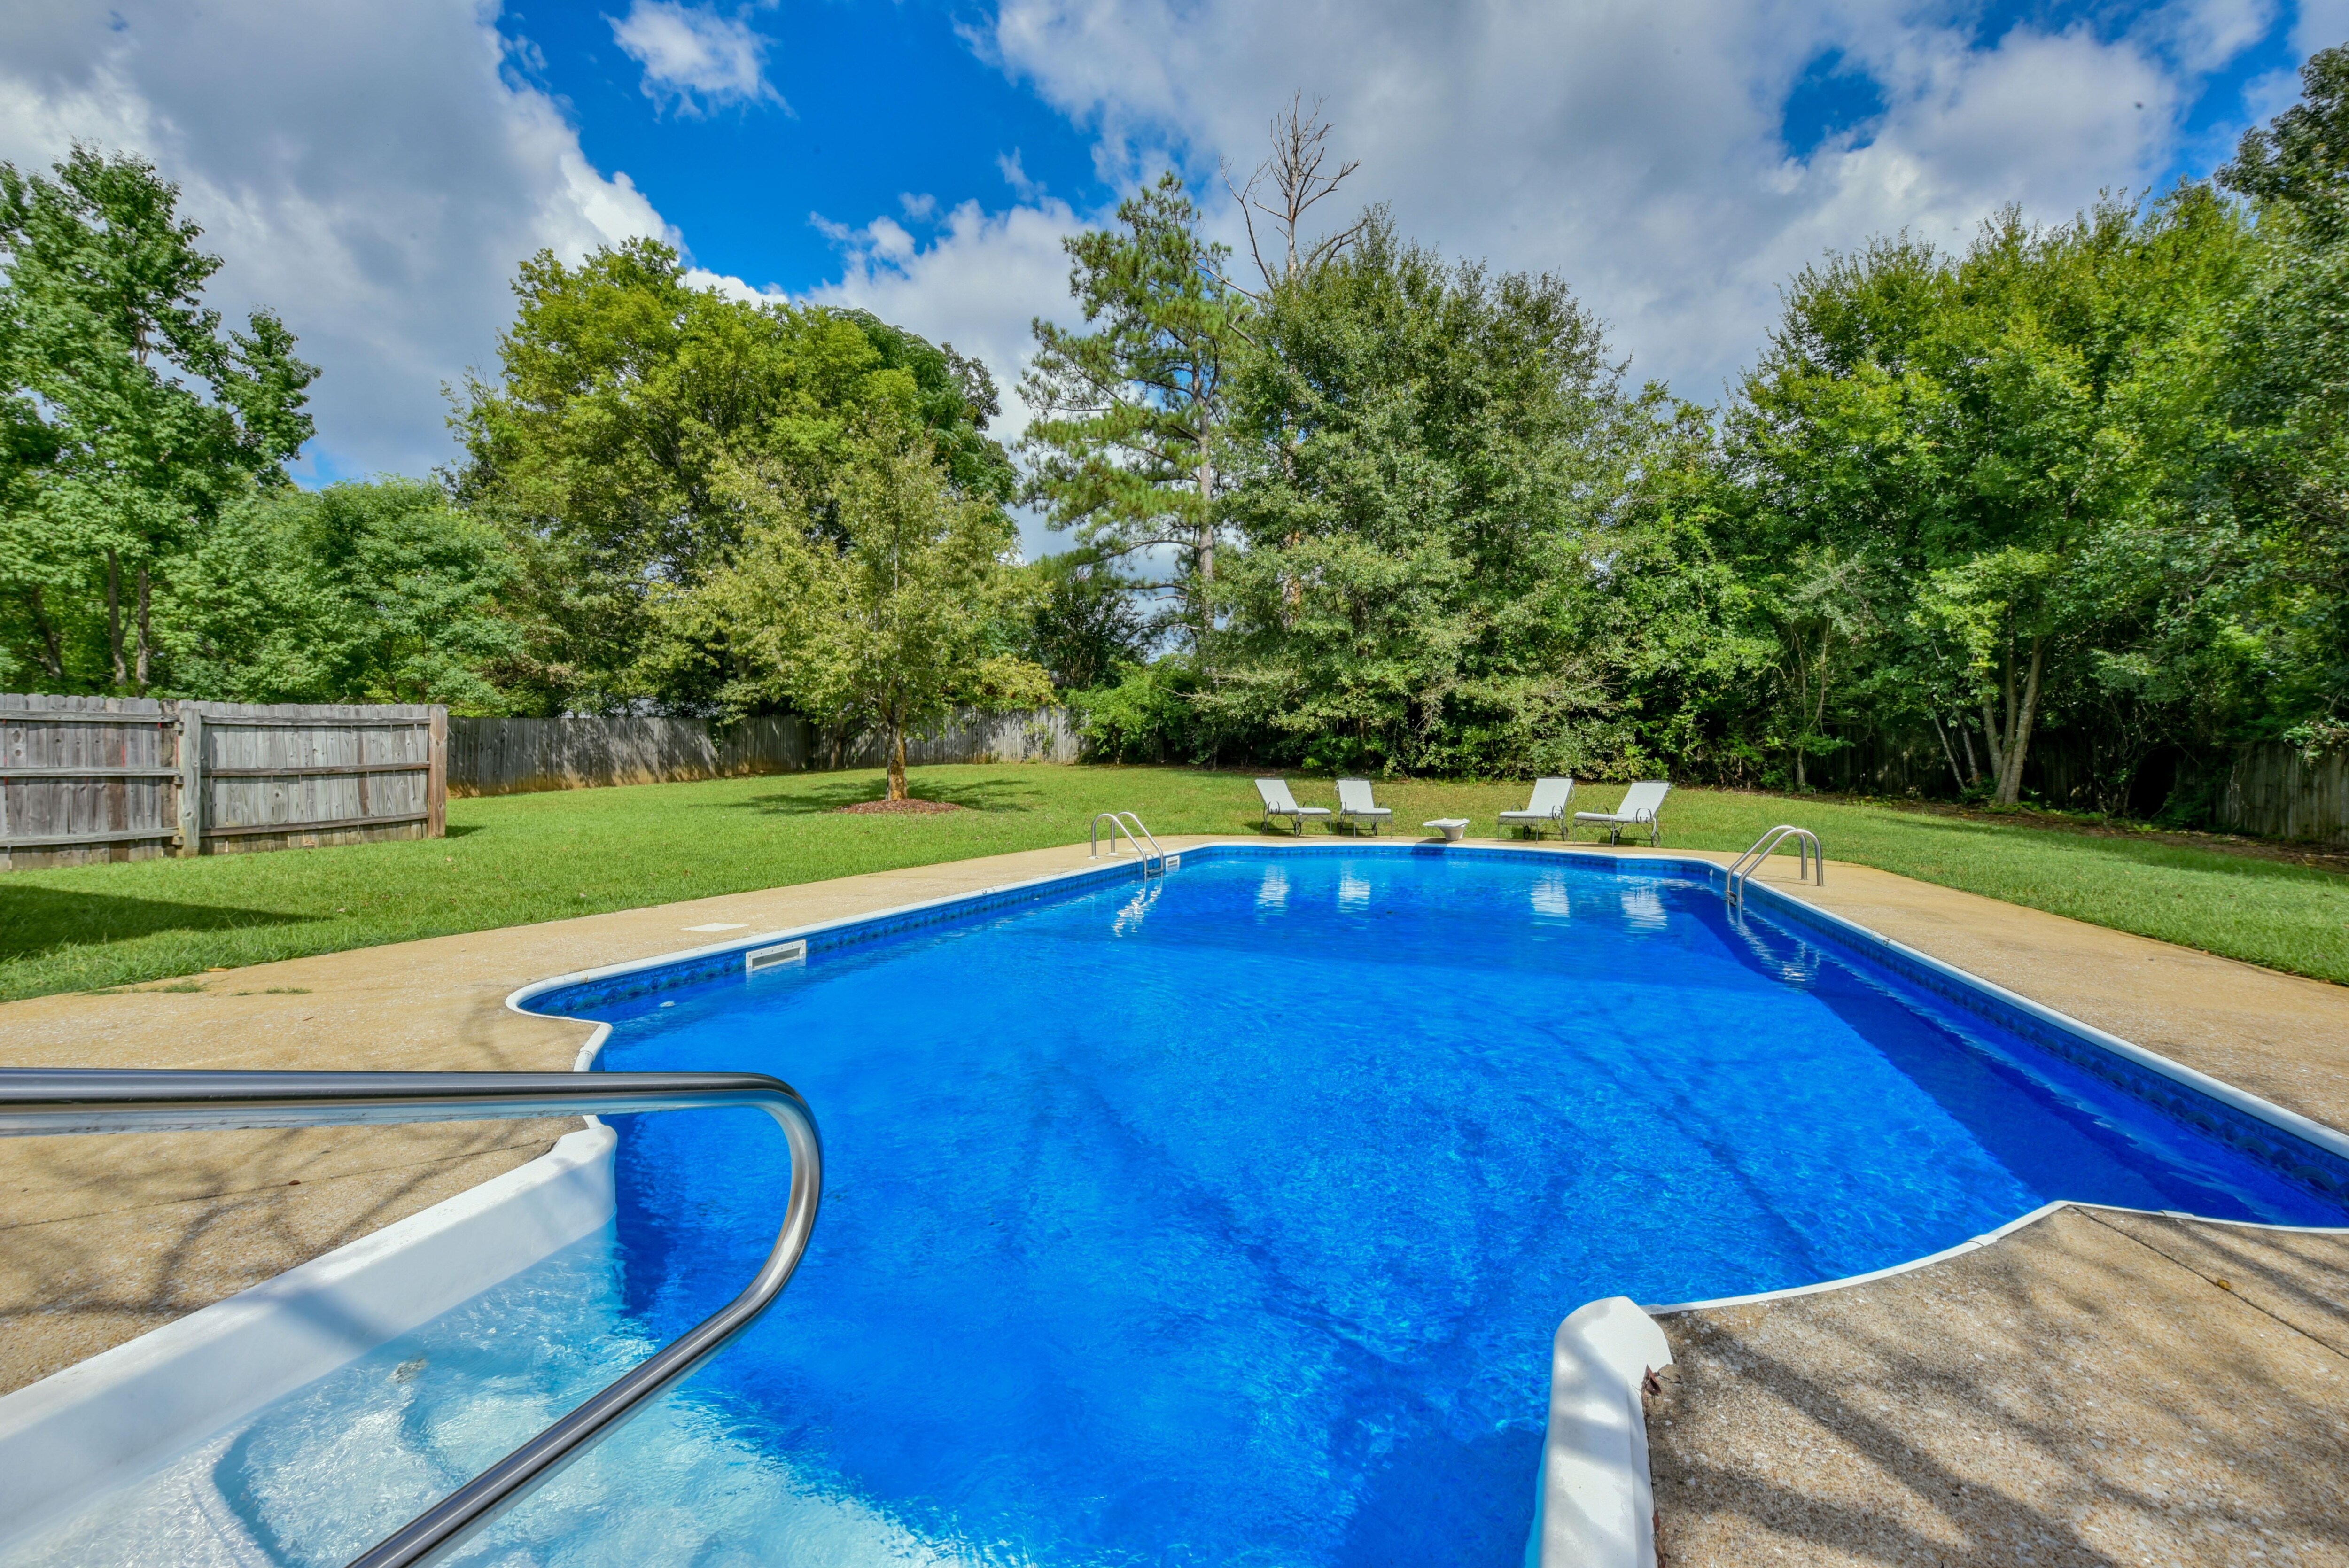 In the backyard of Bama Farmhouse there is a beautiful pool!